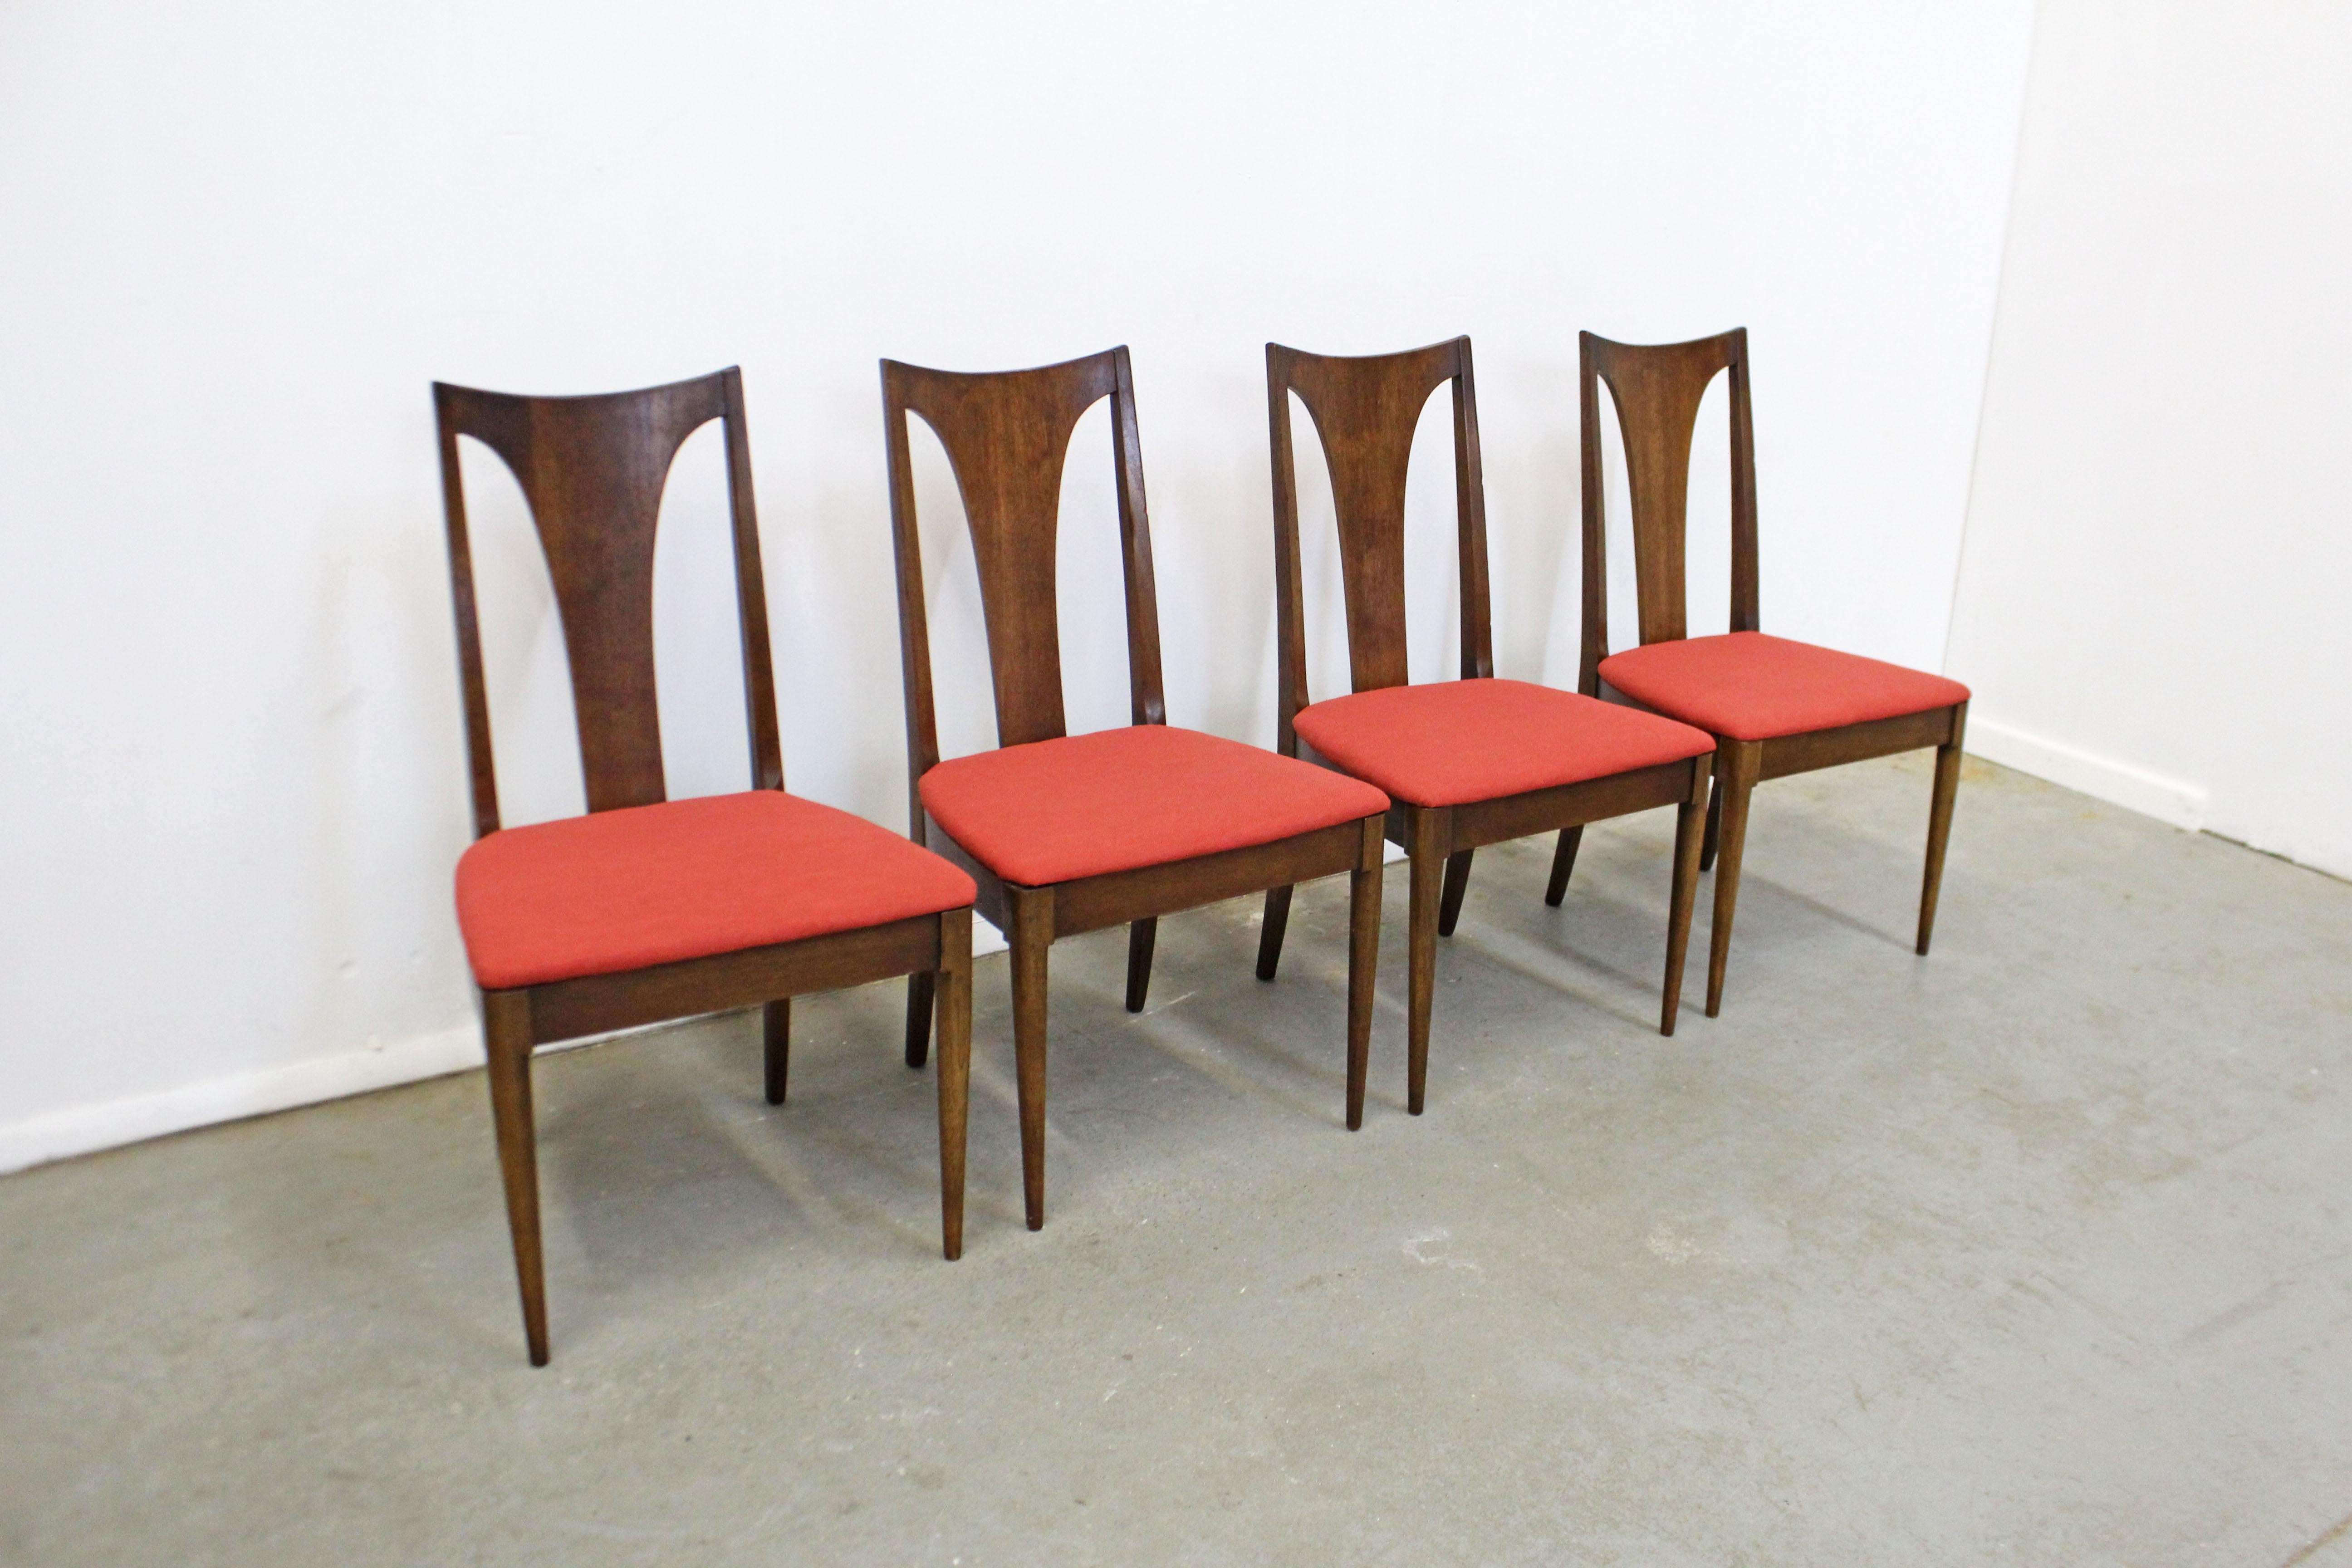 What a find. Offered is a vintage Mid-Century Modern chair set by Broyhill 'Brasilia'. They are made of walnut with red upholstered seats. They are in good, structurally sound condition with reupholstered seats, shows some surface wear, scratches,